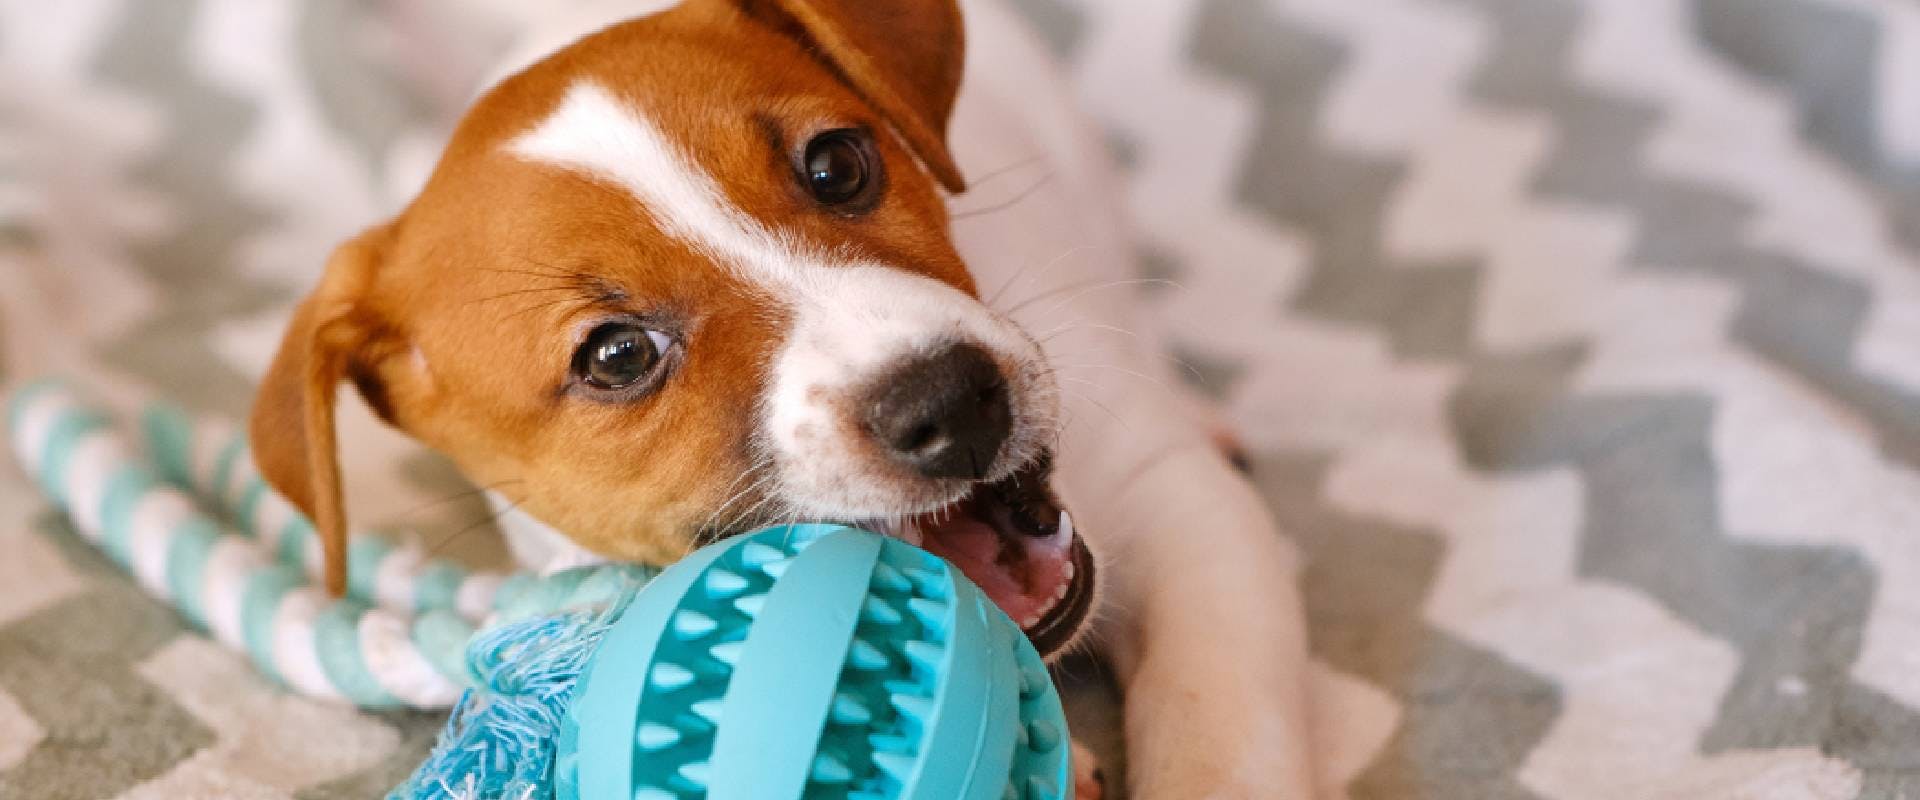 3 Types of Toys to Keep Your Dog Busy While You're at Work